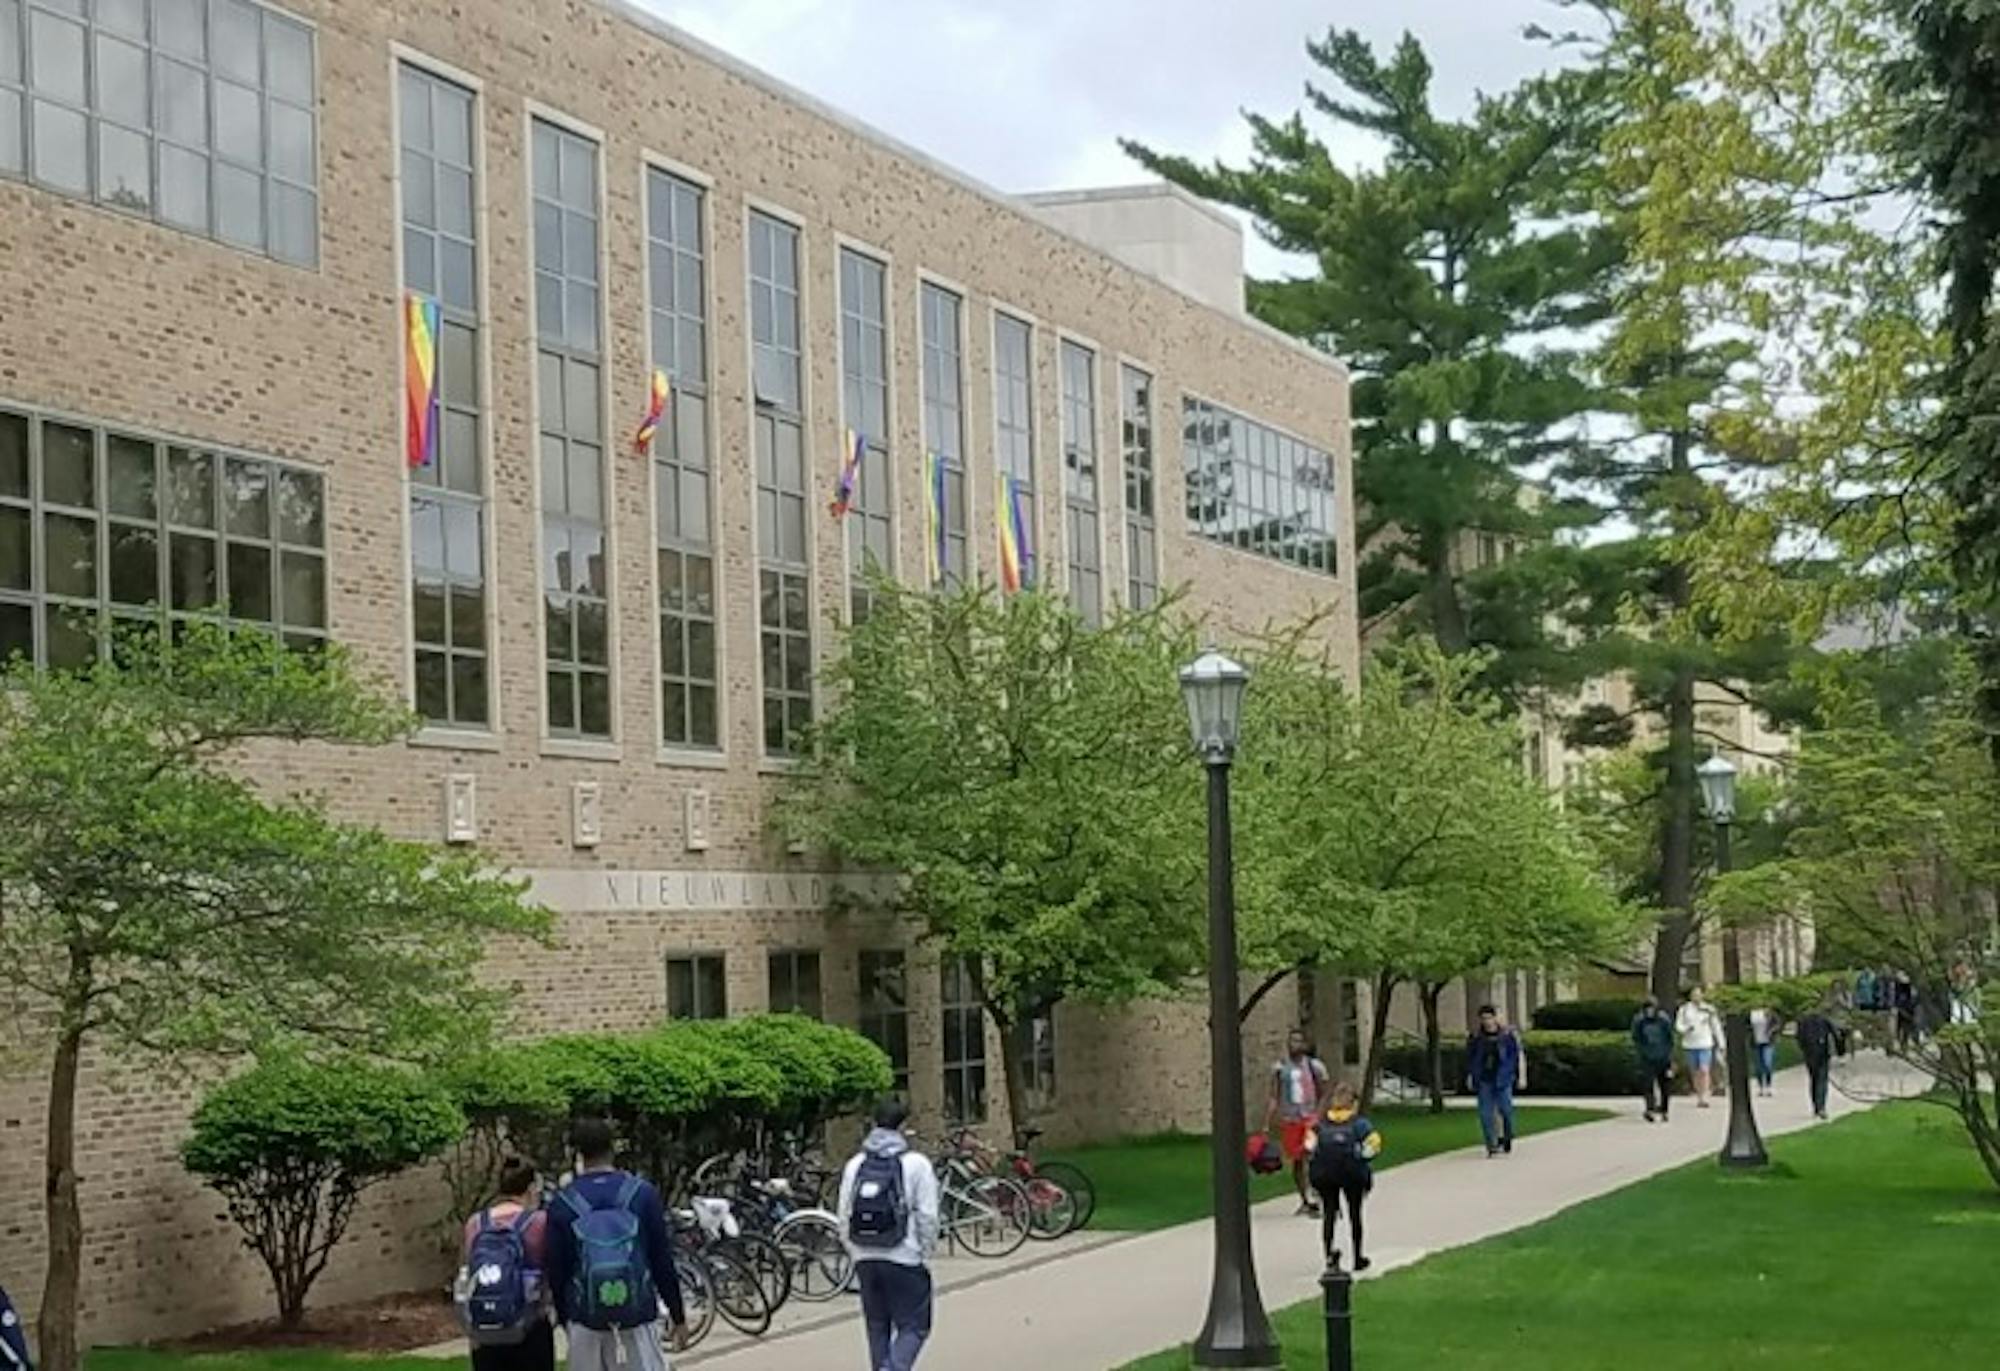 Pride flags hang from the windows of Nieuwland Hall. The flags, distributed by student groups, are being displayed as a sign of protest against this year's Commencement speaker, Vice President Mike Pence.